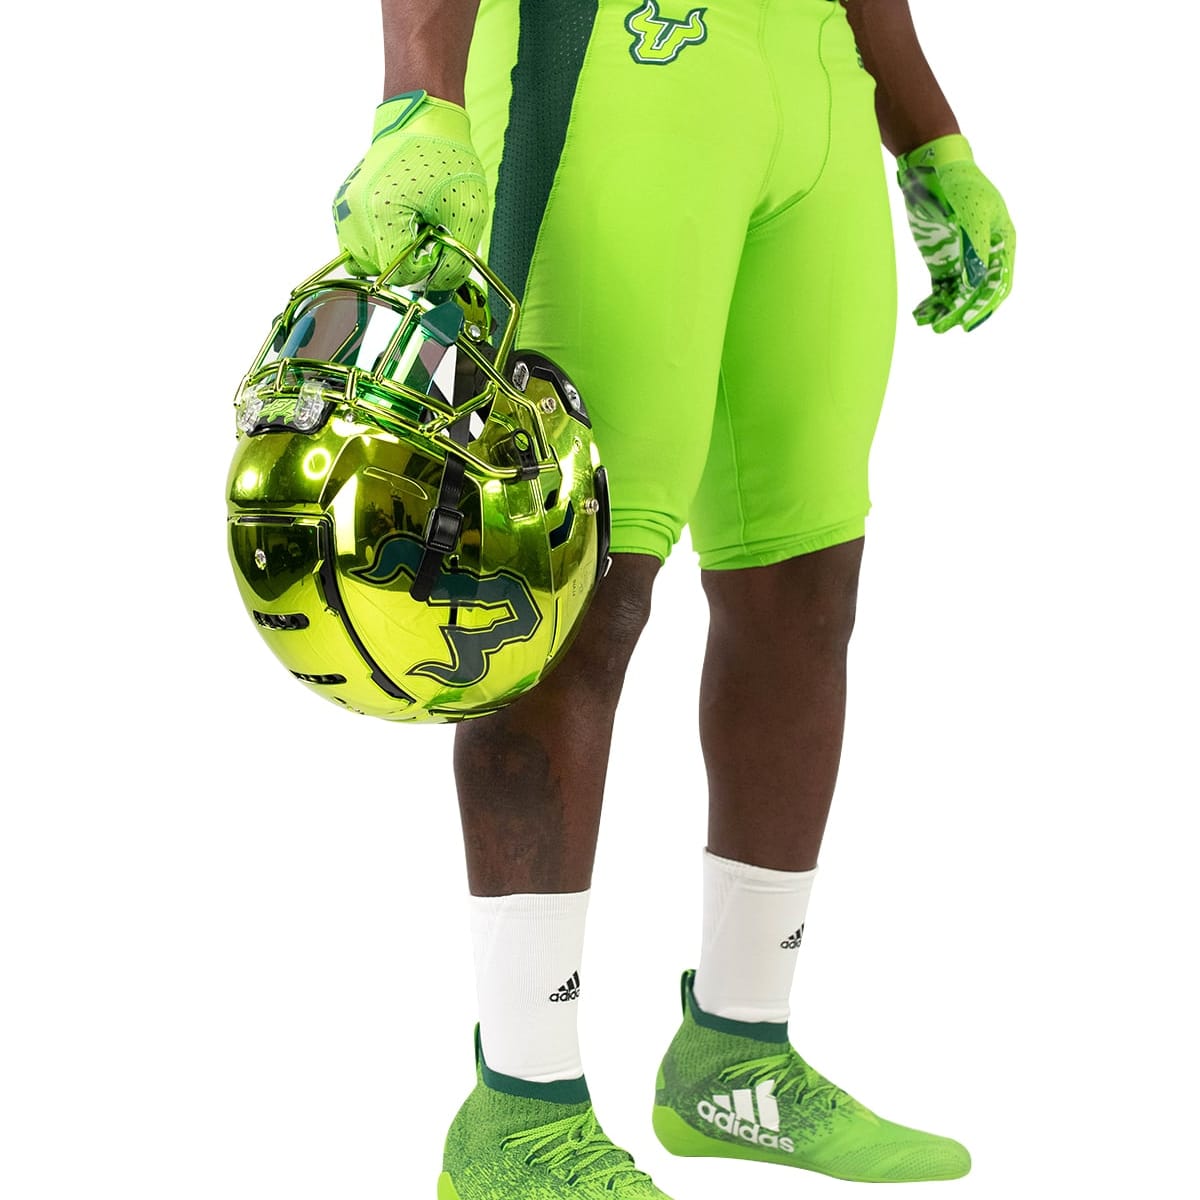 South Florida will debut new Green Slime jerseys on Friday - Footballscoop